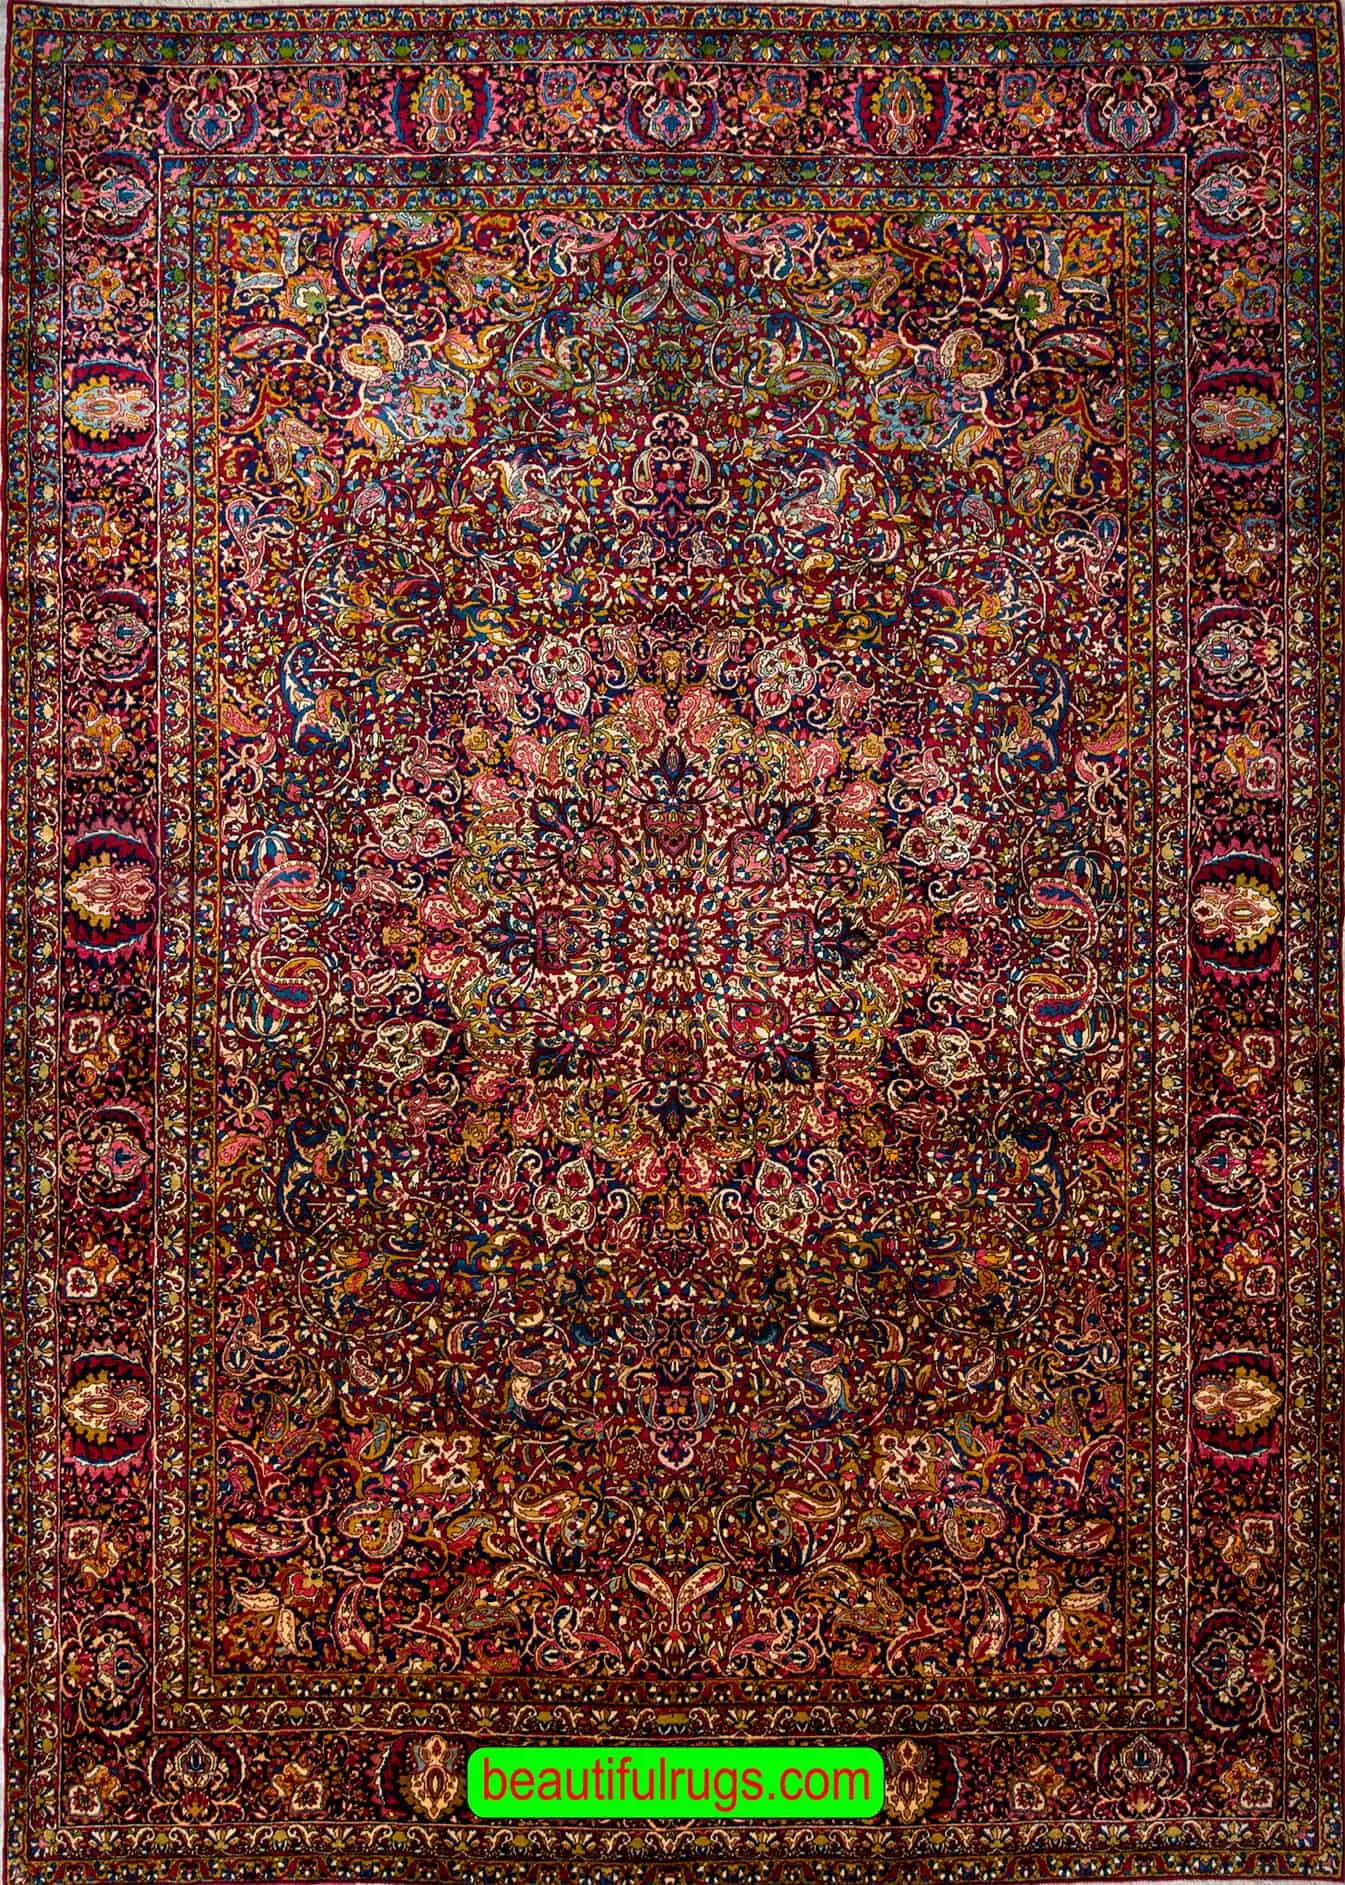 Handmade antique Persian Yazd rug, intricate traditional style rug, multicolored with red color in the main field. Size 10.3x15.